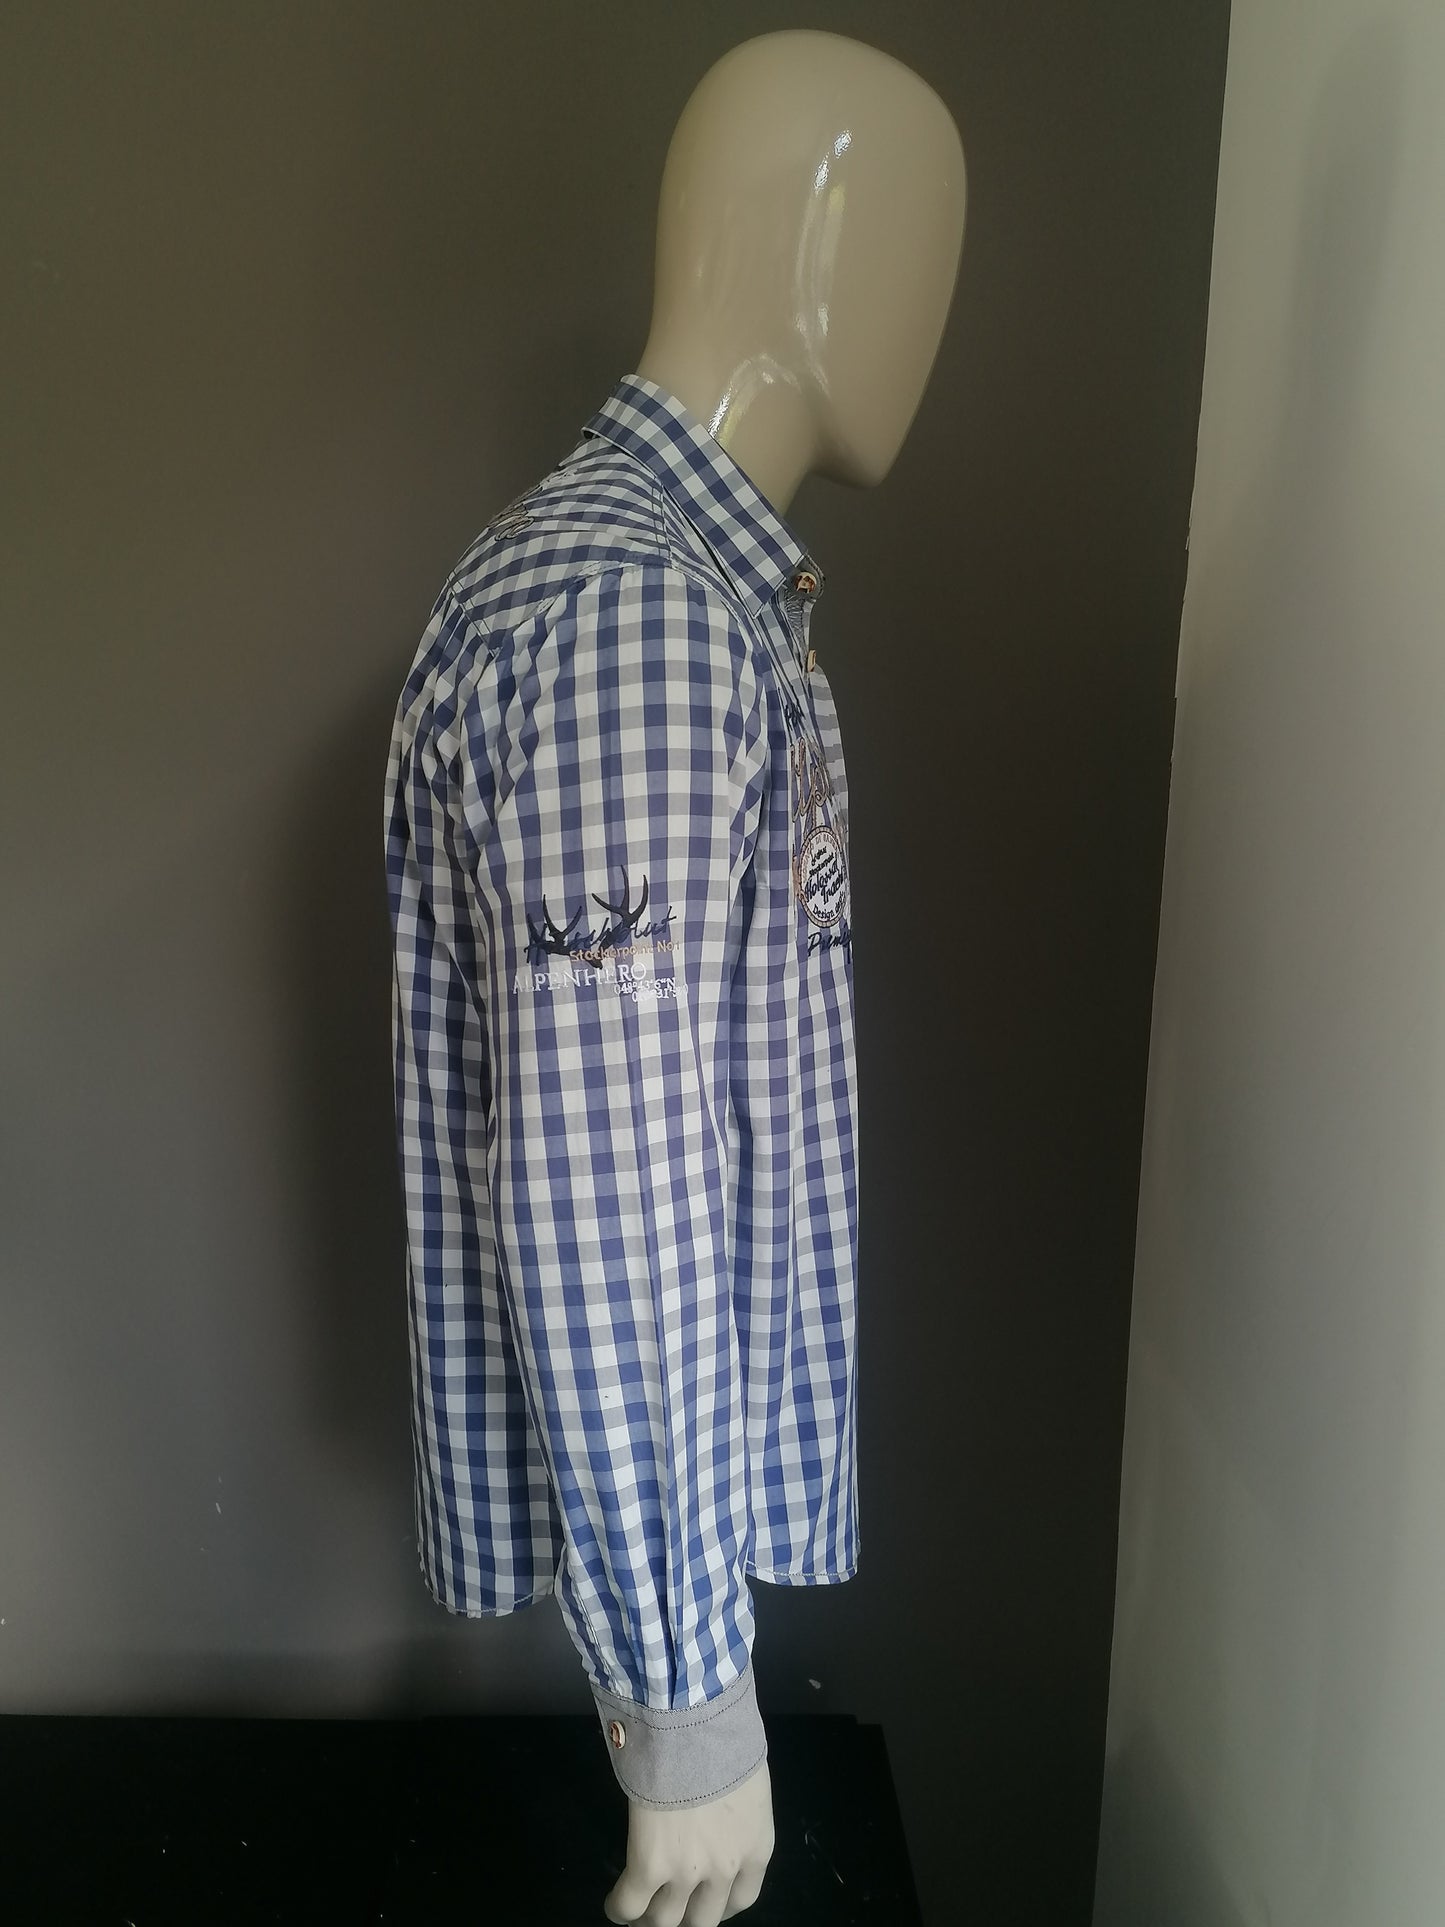 Stockerpoint shirt. Blue white blocked with applications. Size M.